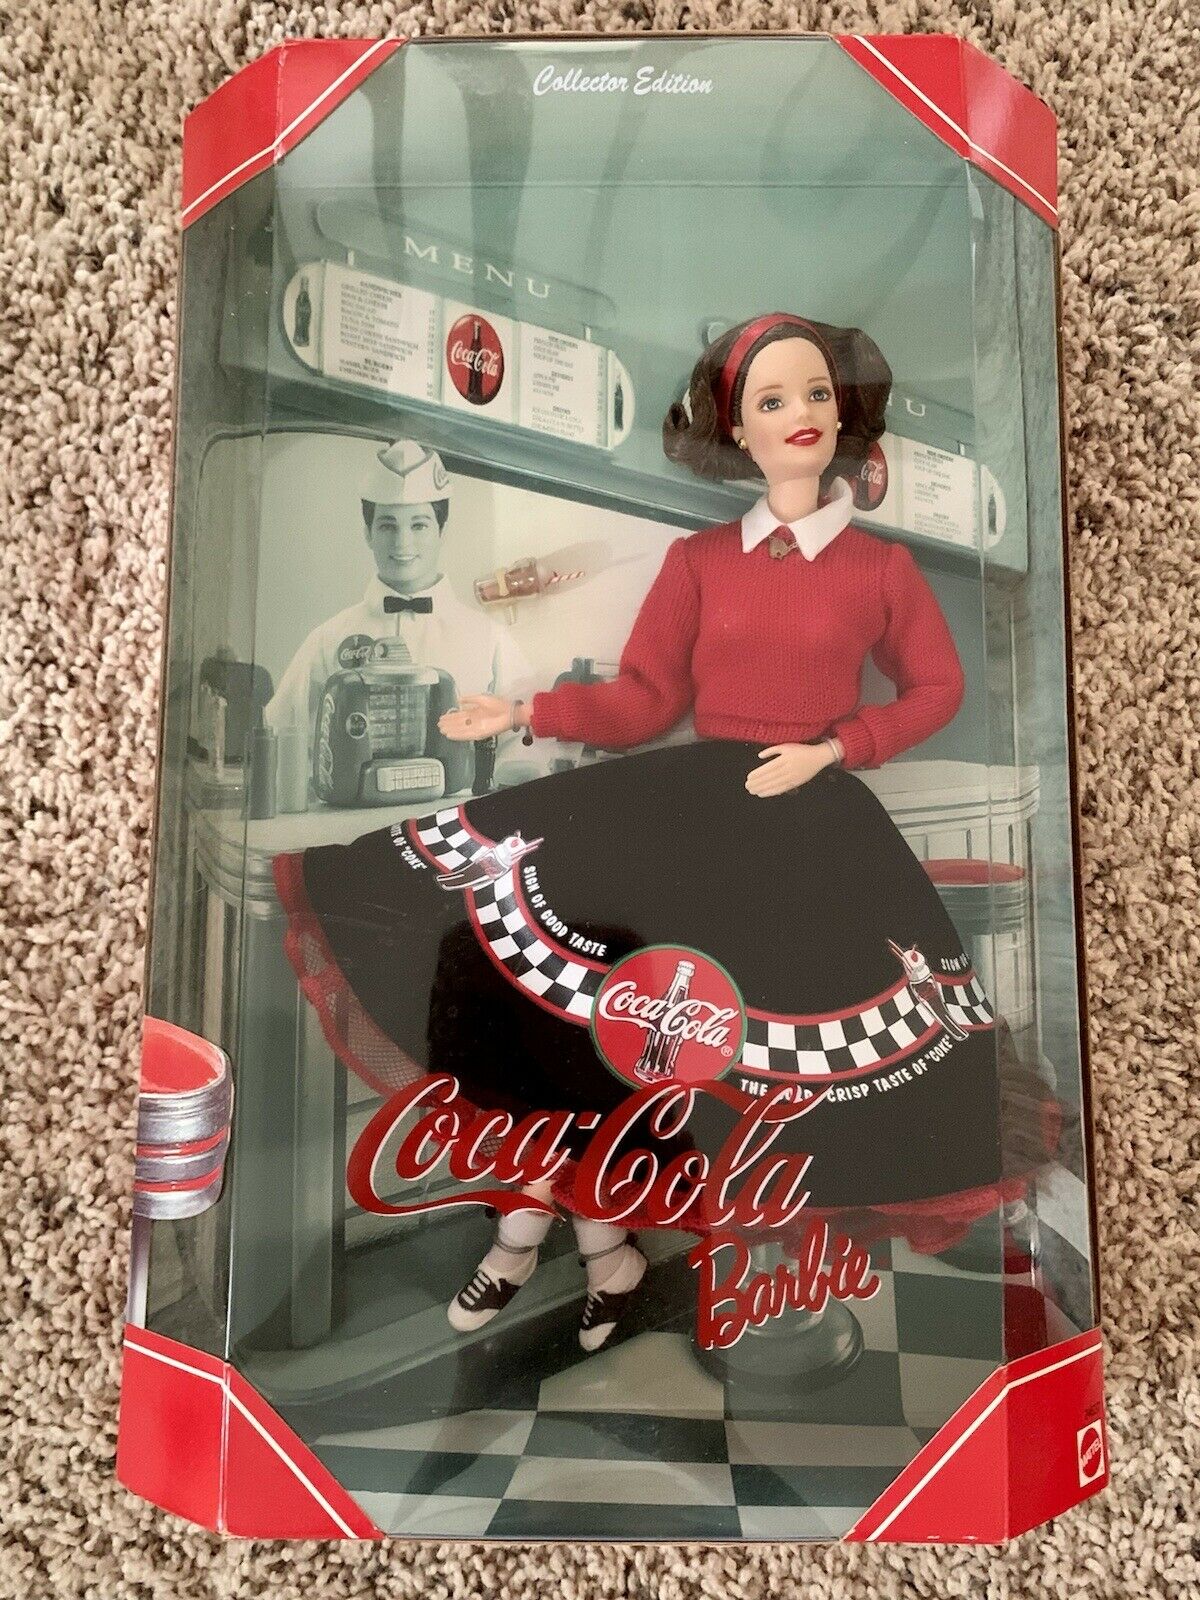 Nrfb 1999 Coca-cola Barbie Teresa Doll Collector Edition 2nd In Series